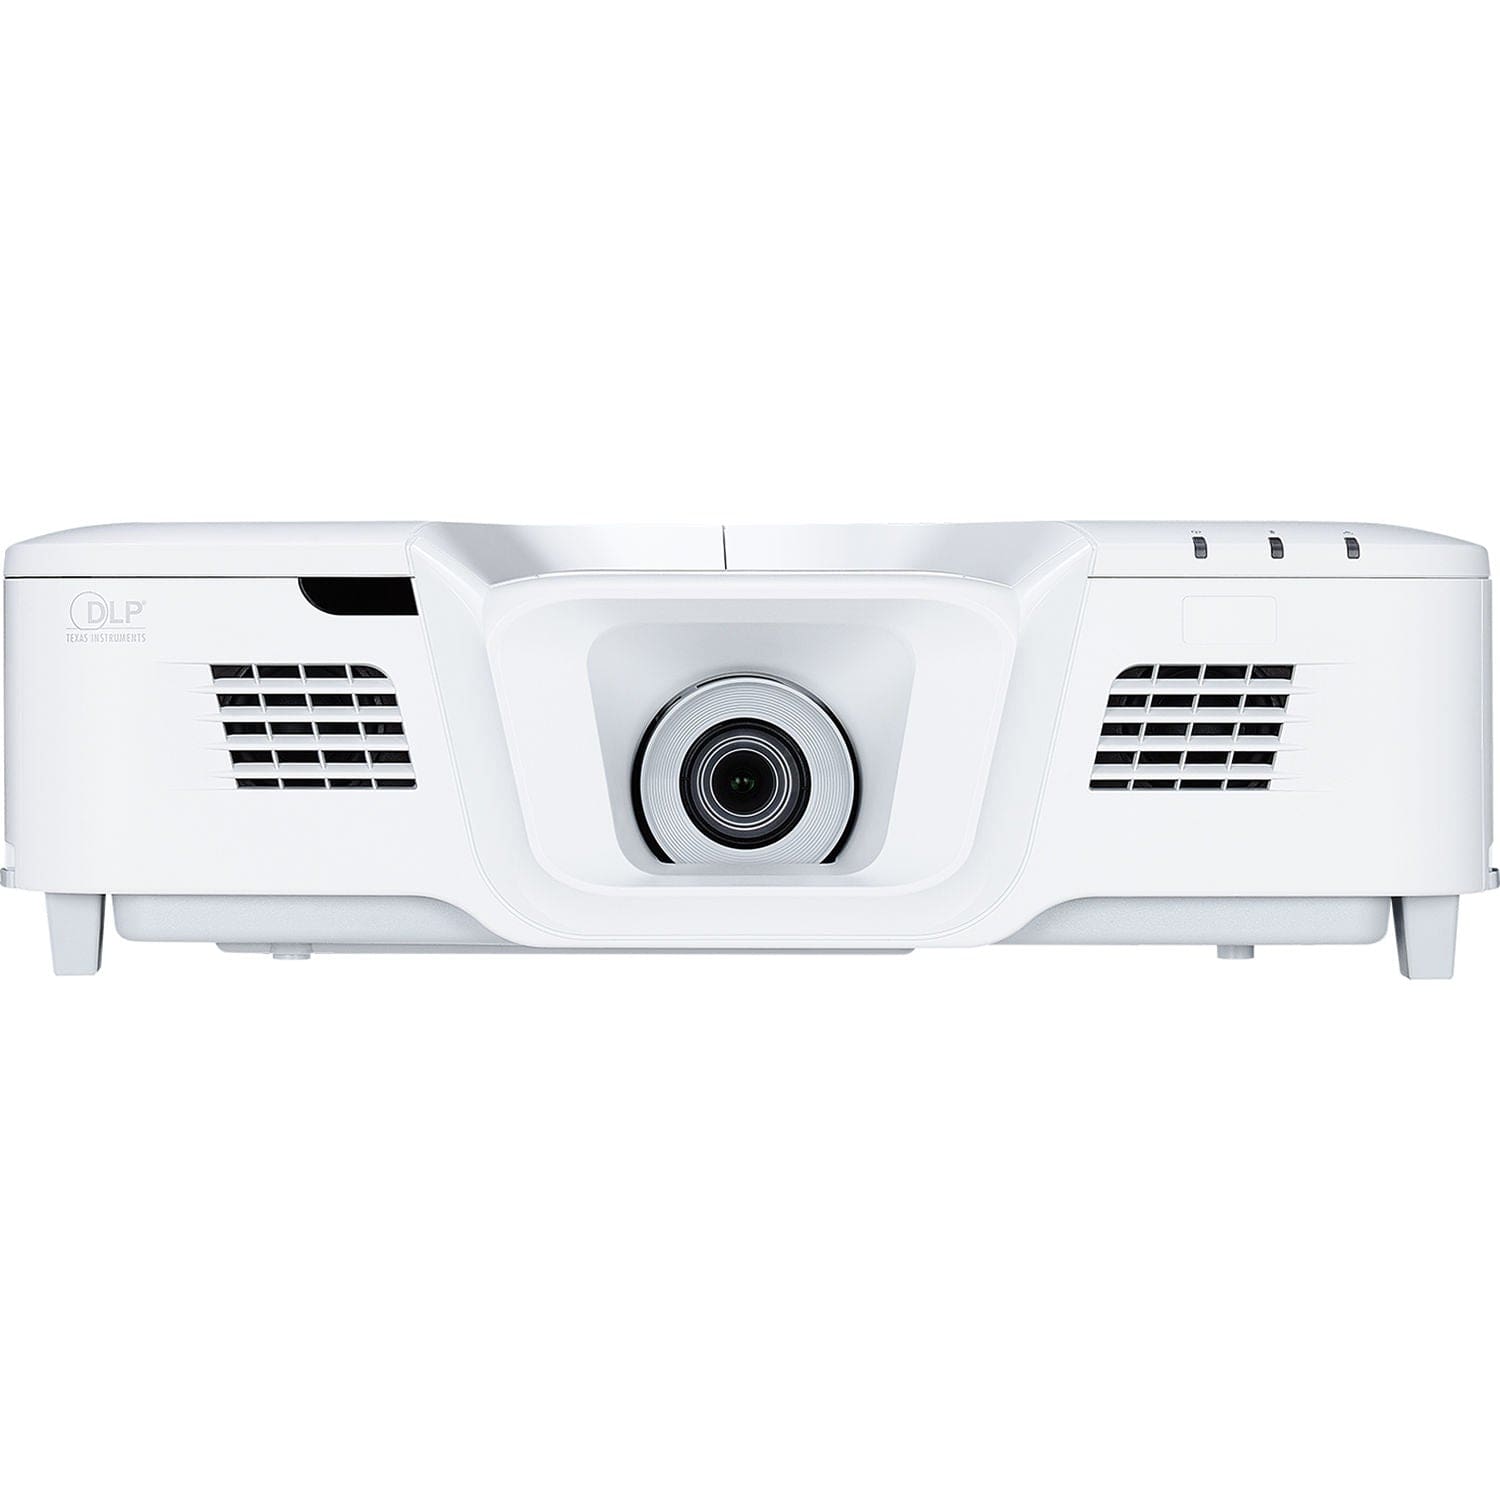 ViewSonic PG800W 5000 Lumens WXGA HDMI Networkable Home and Office Projector